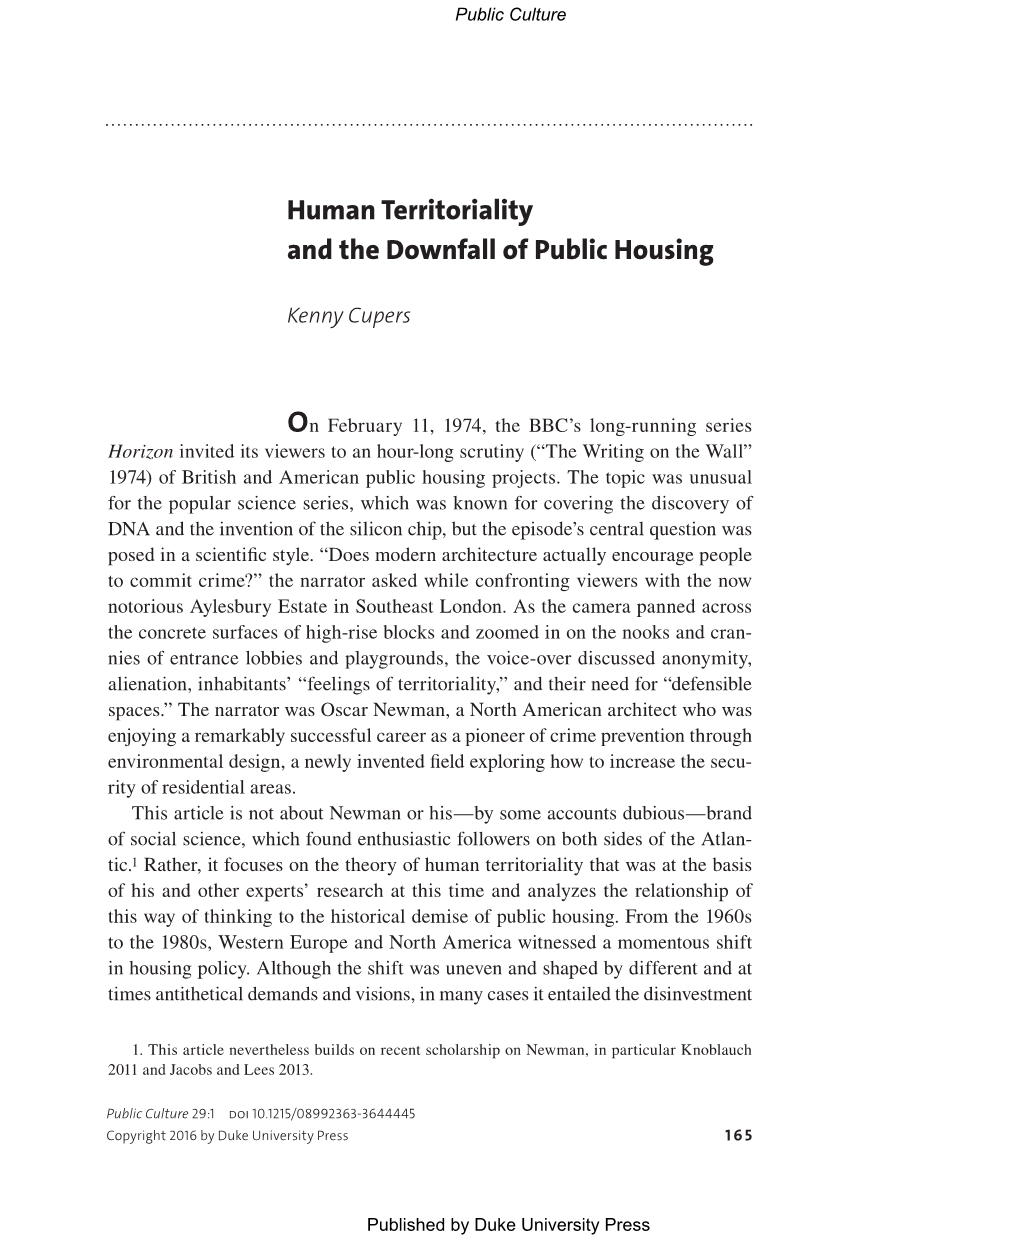 Human Territoriality and the Downfall of Public Housing